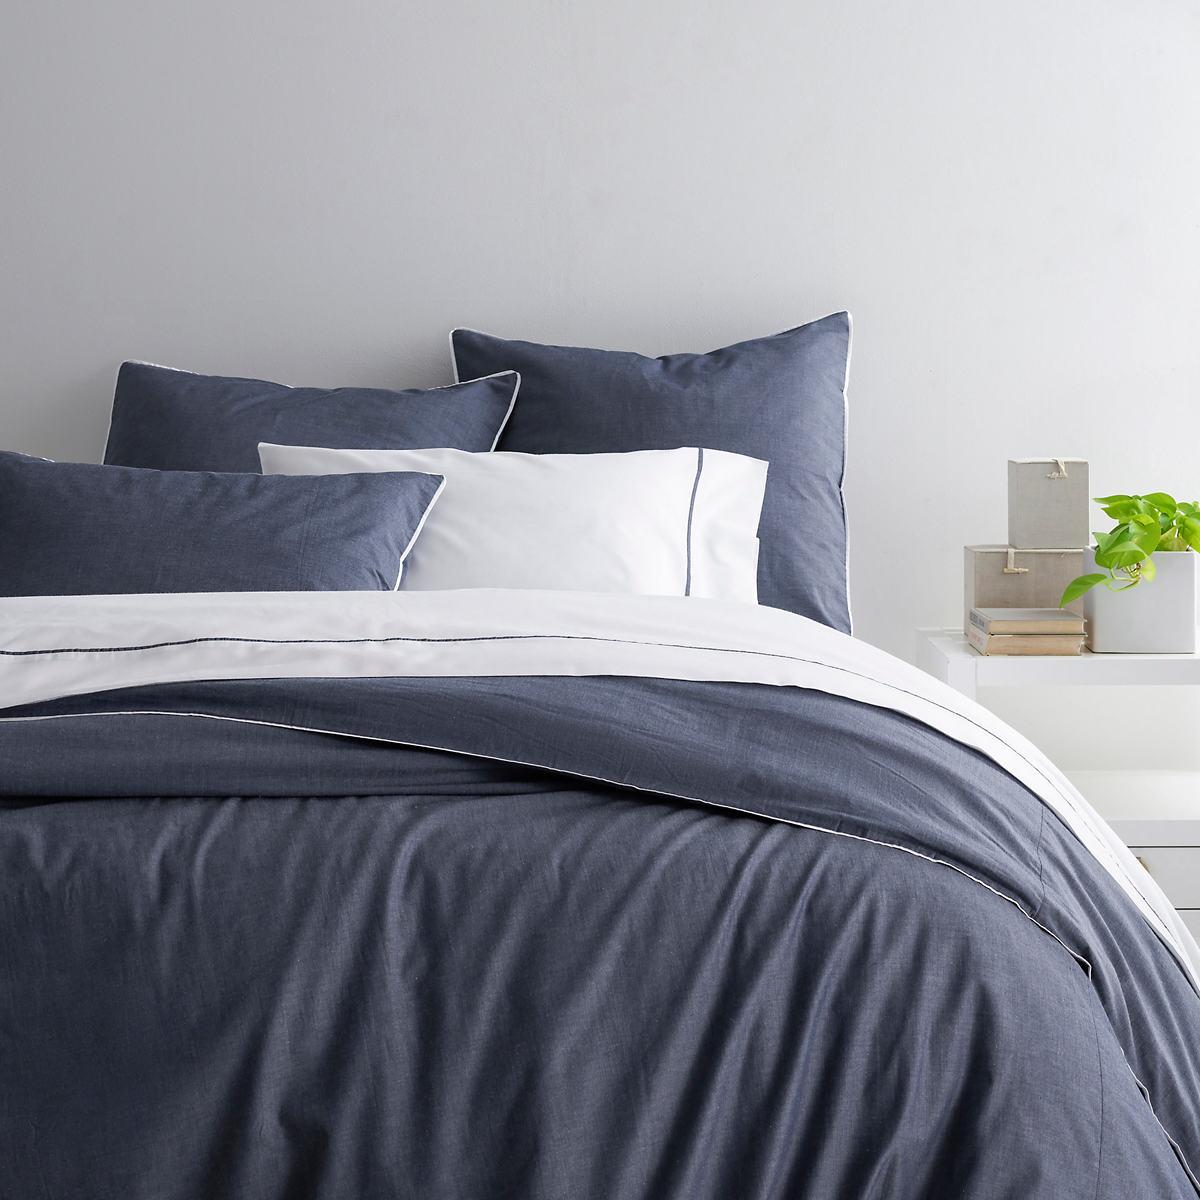 Chambray Blue Duvet Cover The Outlet